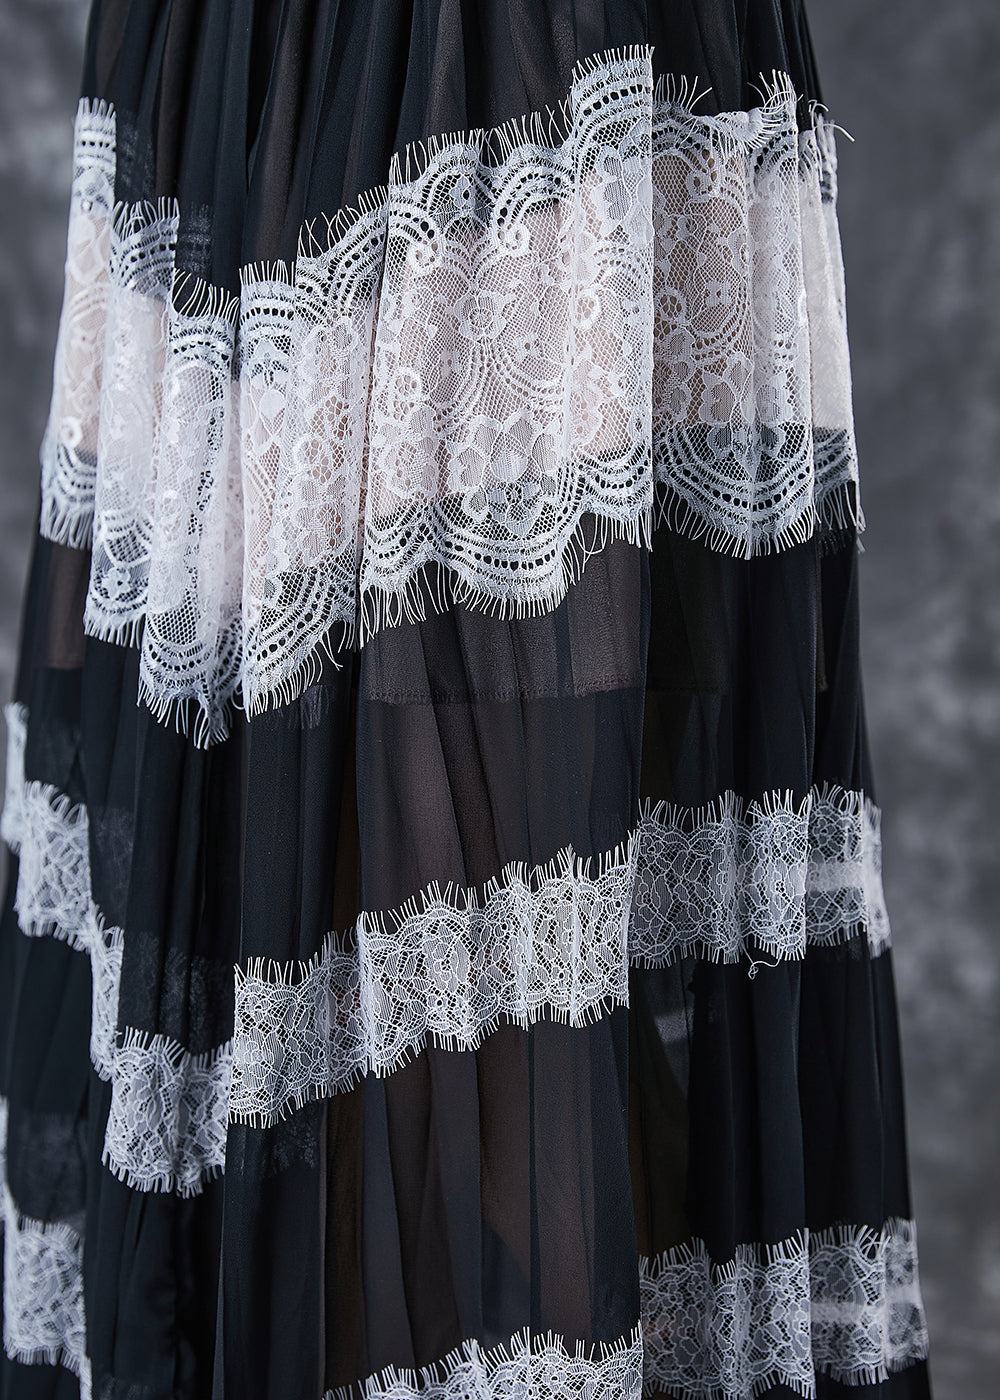 Casual Black Exra Large Hem Patchwork Lace Linen Silk Pleated Dresses Sleeveless